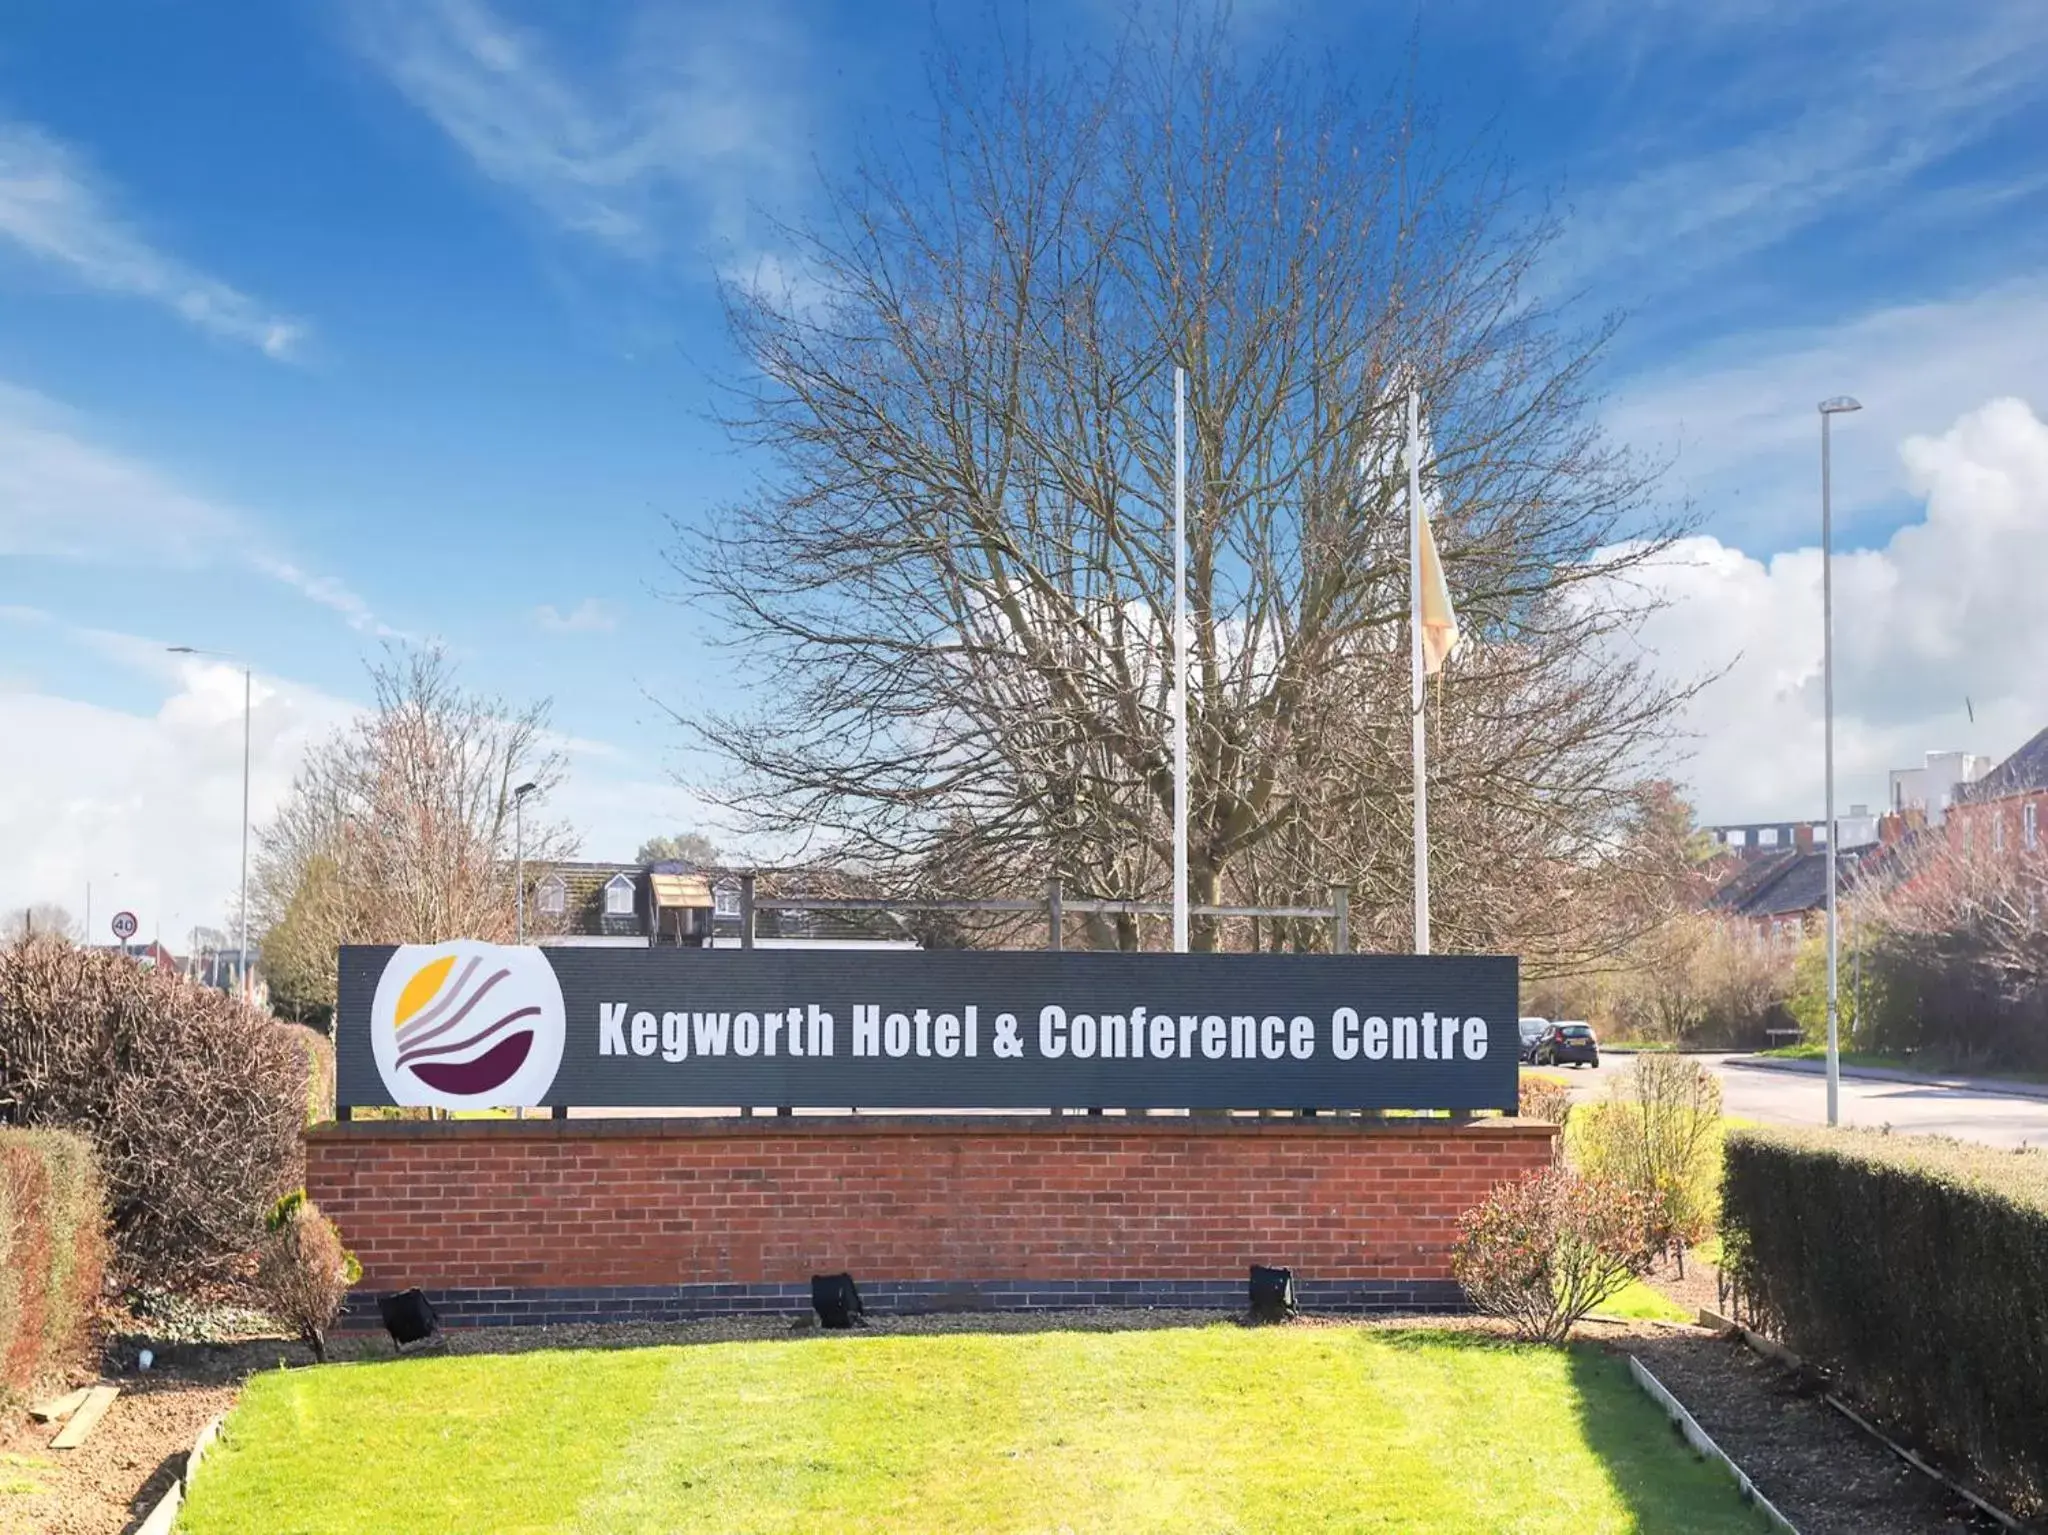 Property Building in Kegworth Hotel & Conference Centre